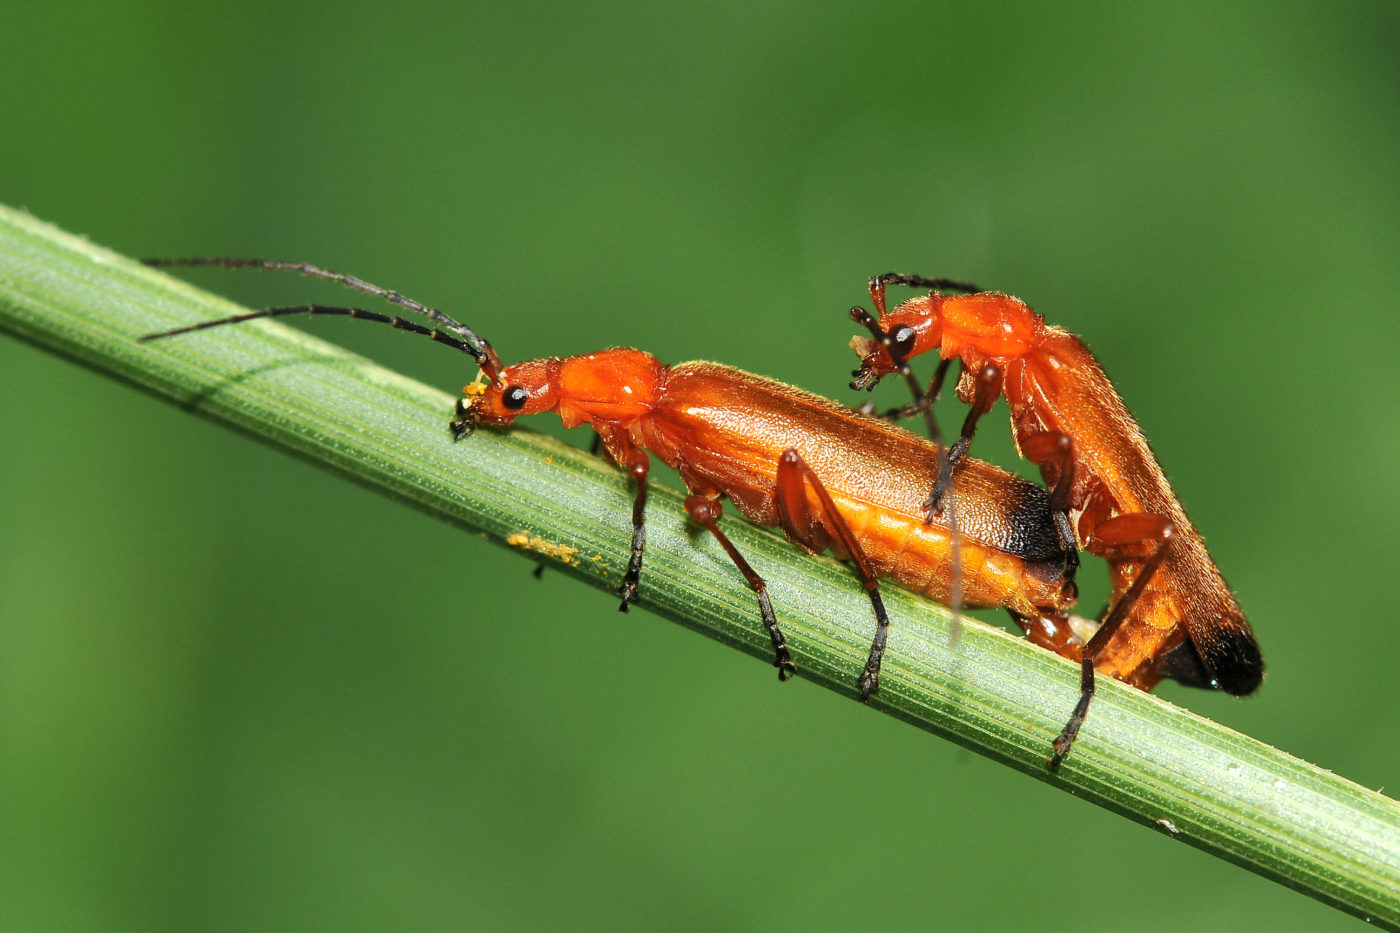 Common red soldier beetles, Rhagonycha fulva, are frequently seen as mating pairs like this. Beverley Brouwer reports that they are often in great abundance in the fields near her home in Genemuiden. In this photograph she especially liked the contrast